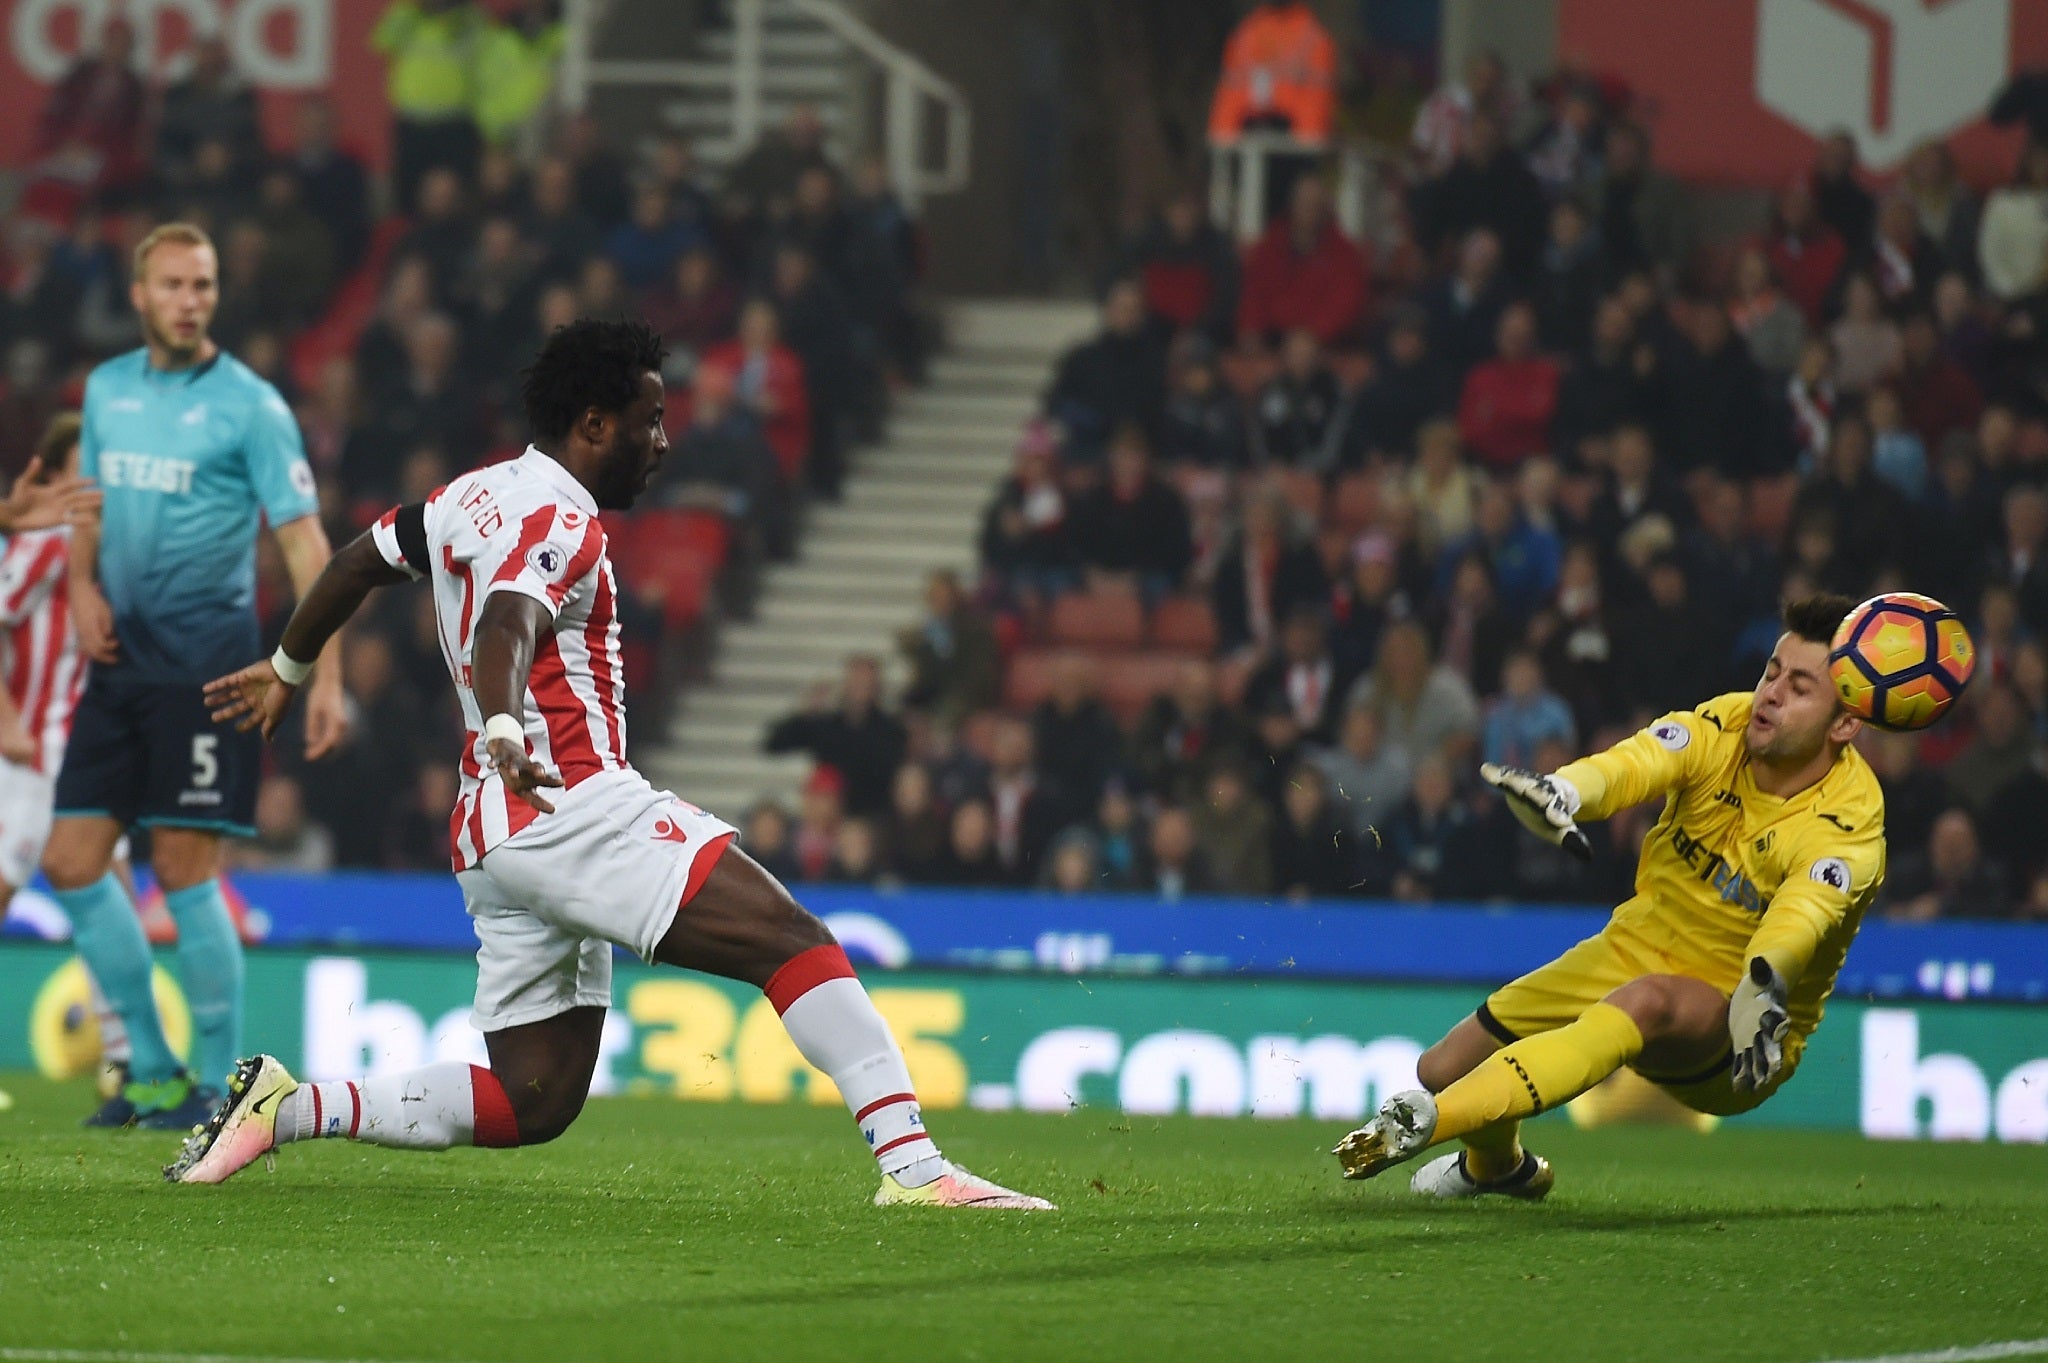 Wilfried Bony opened the scoring with his first goal for Stoke against his former side